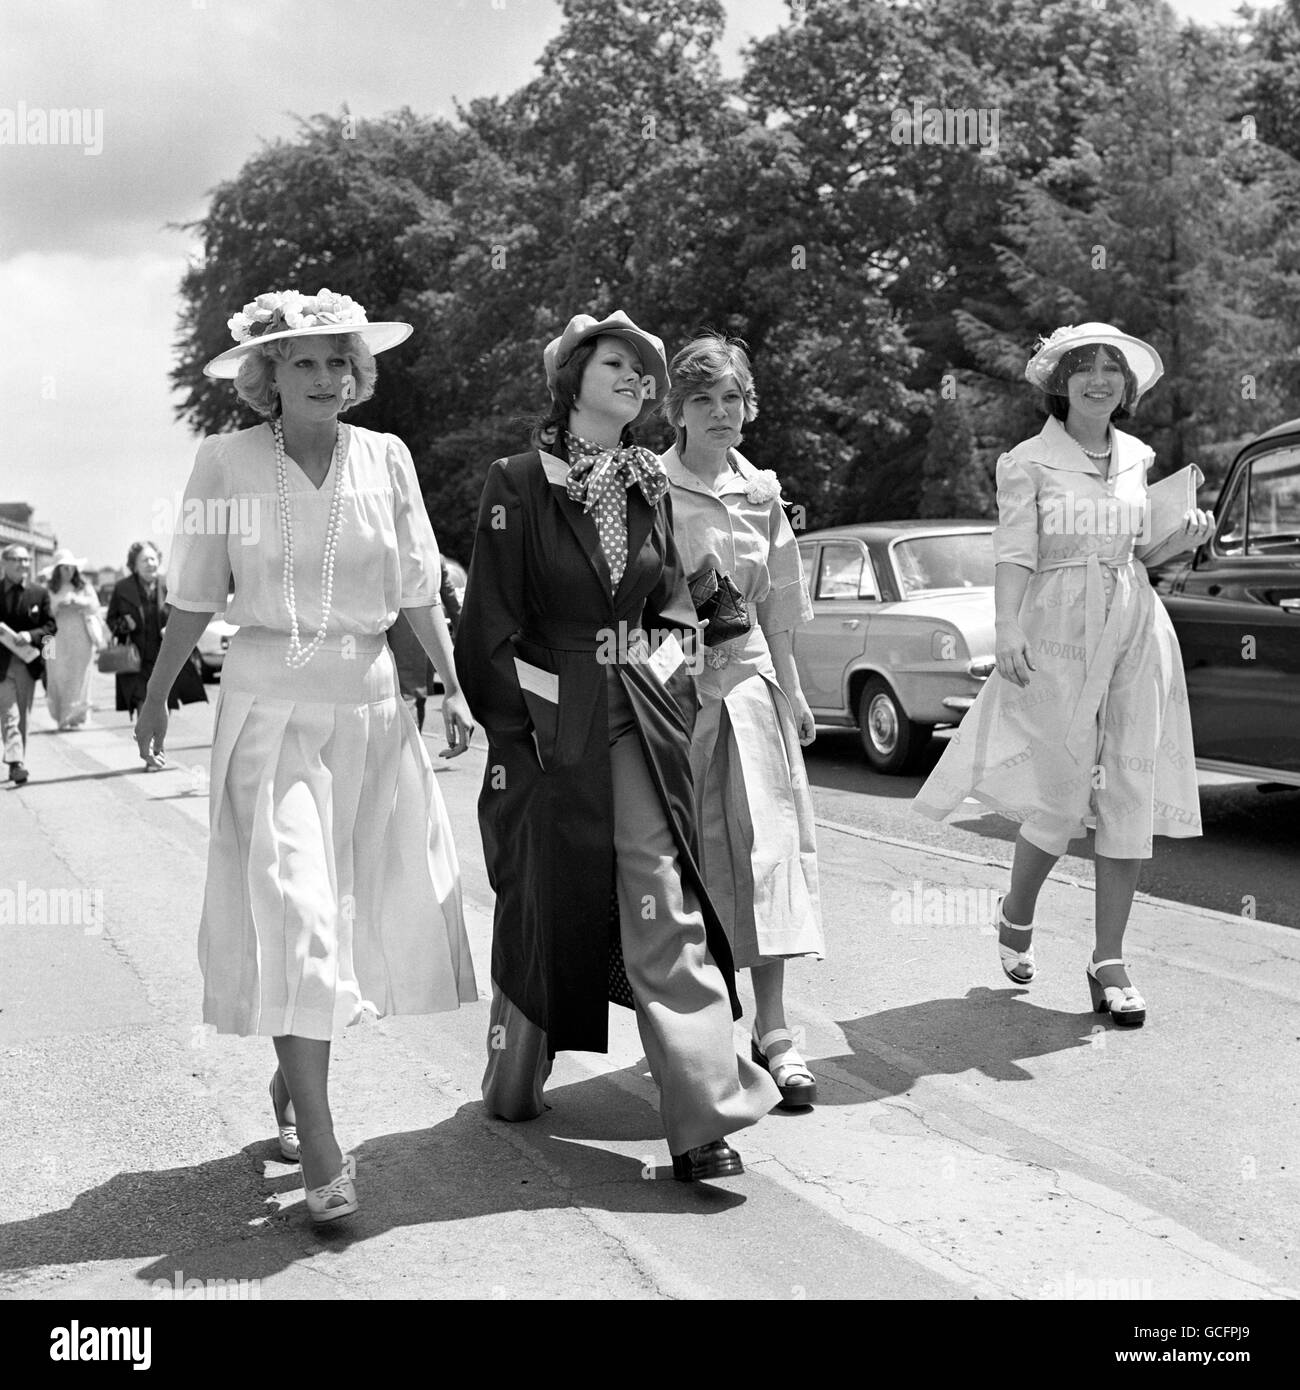 Four girls wearing the 1920s style clothes, inspired by the film 'The Great Gatsby'. The 'Gatsby' style was very prominent at the Royal Ascot race meeting. Stock Photo